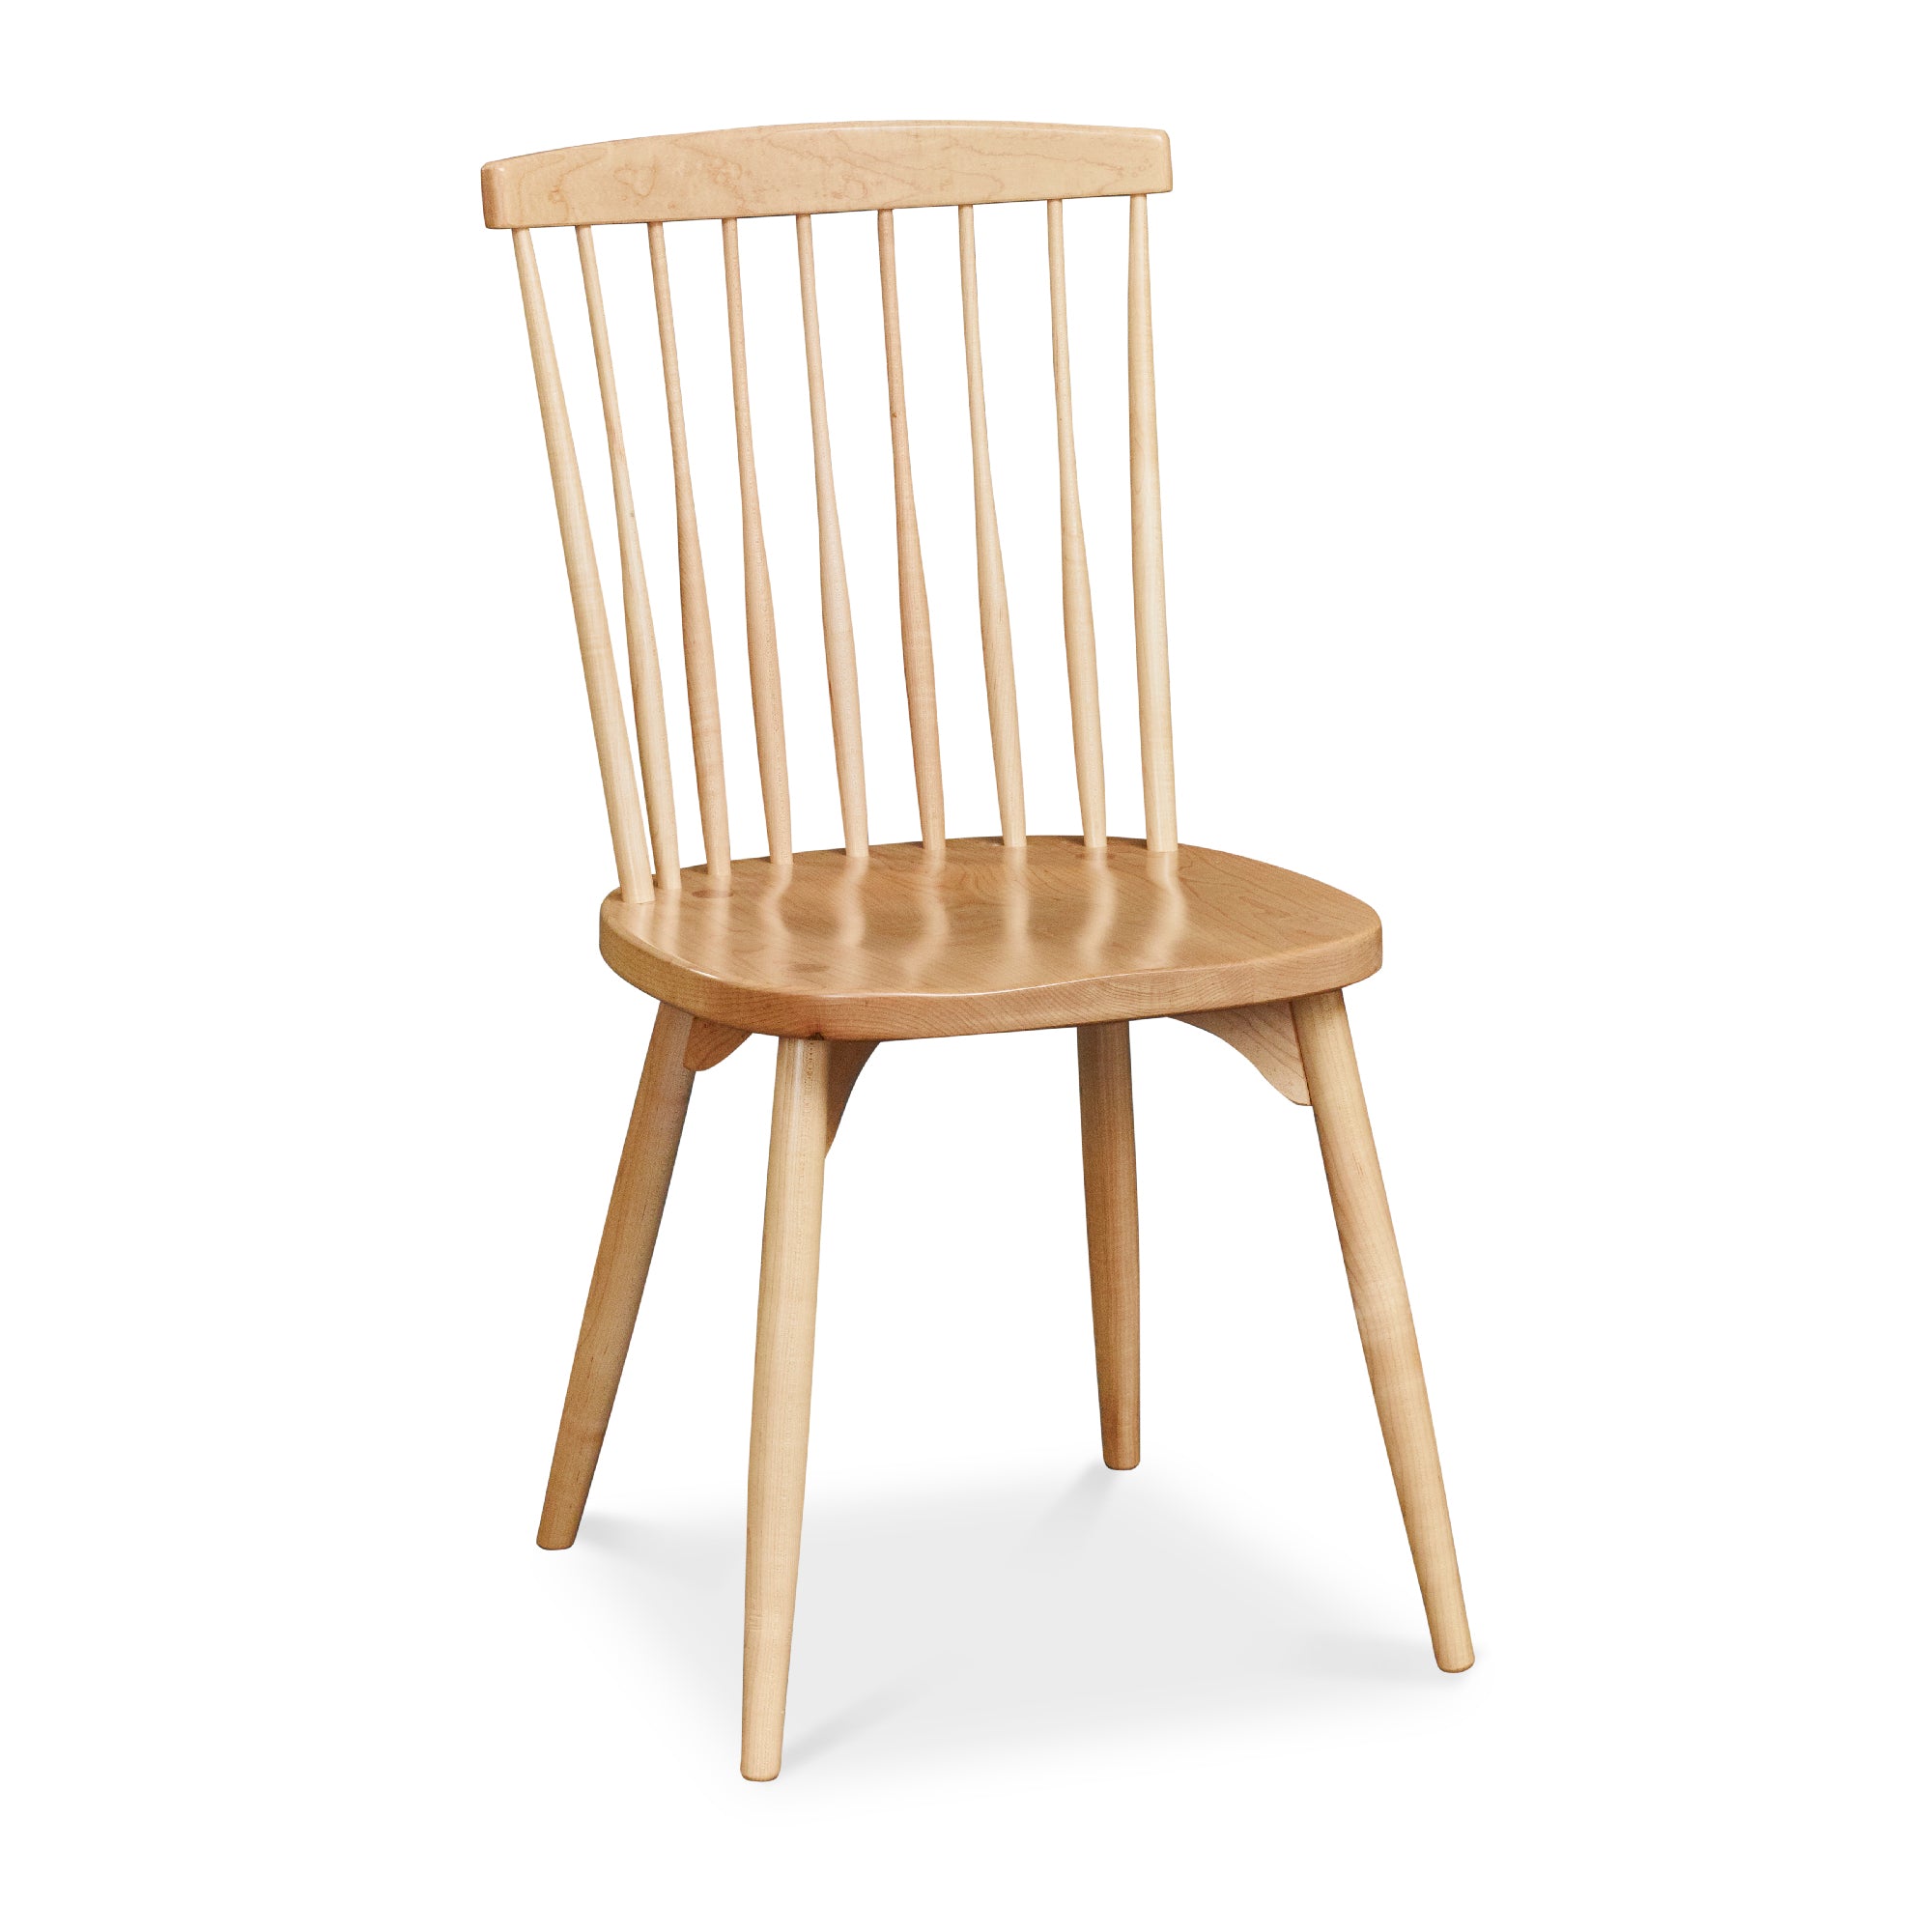 Classic spindle back chair with round tapered legs in solid maple wood